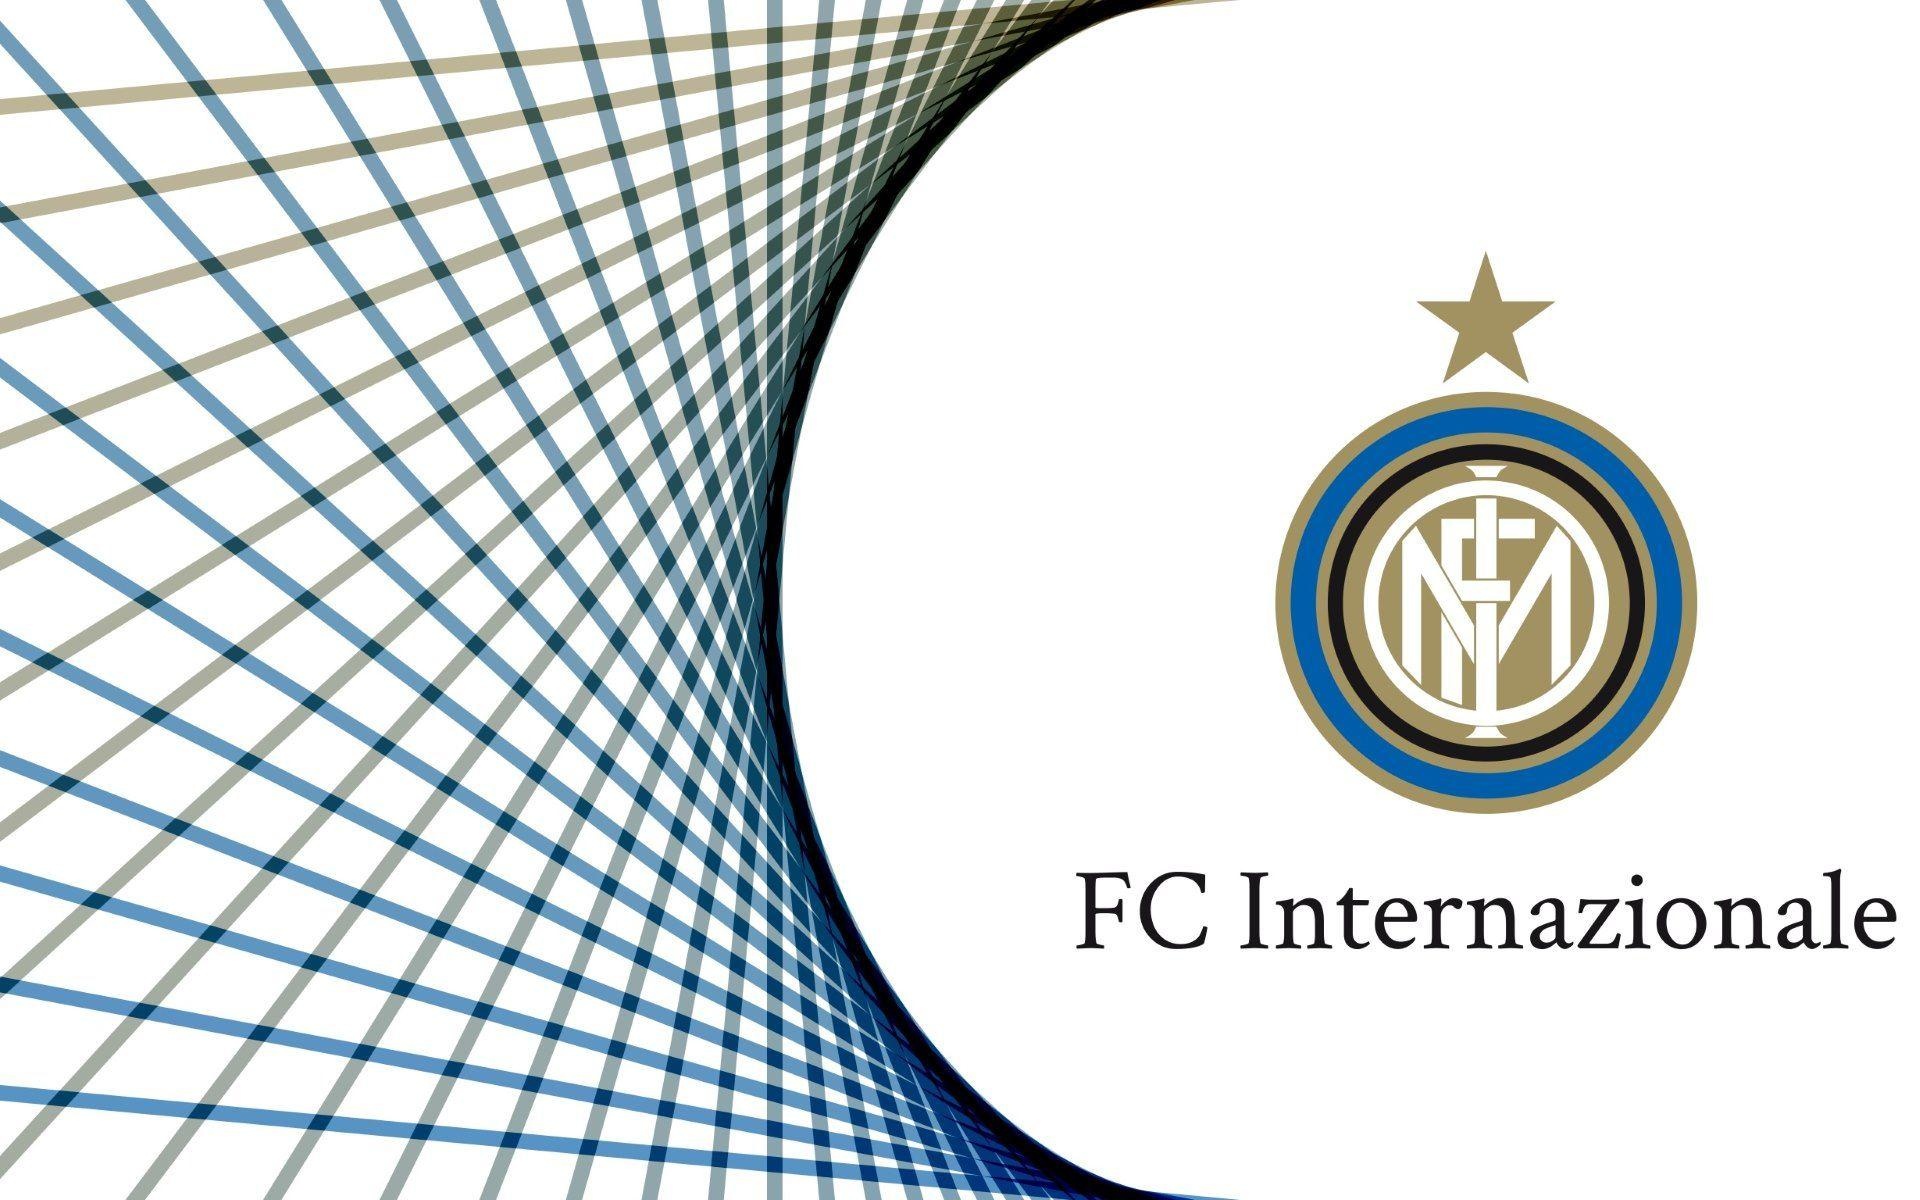 Inter: The first Italian club to win the highly coveted treble - the Serie A, Coppa Italia, and UEFA Champions League titles in the same season. 1920x1200 HD Wallpaper.